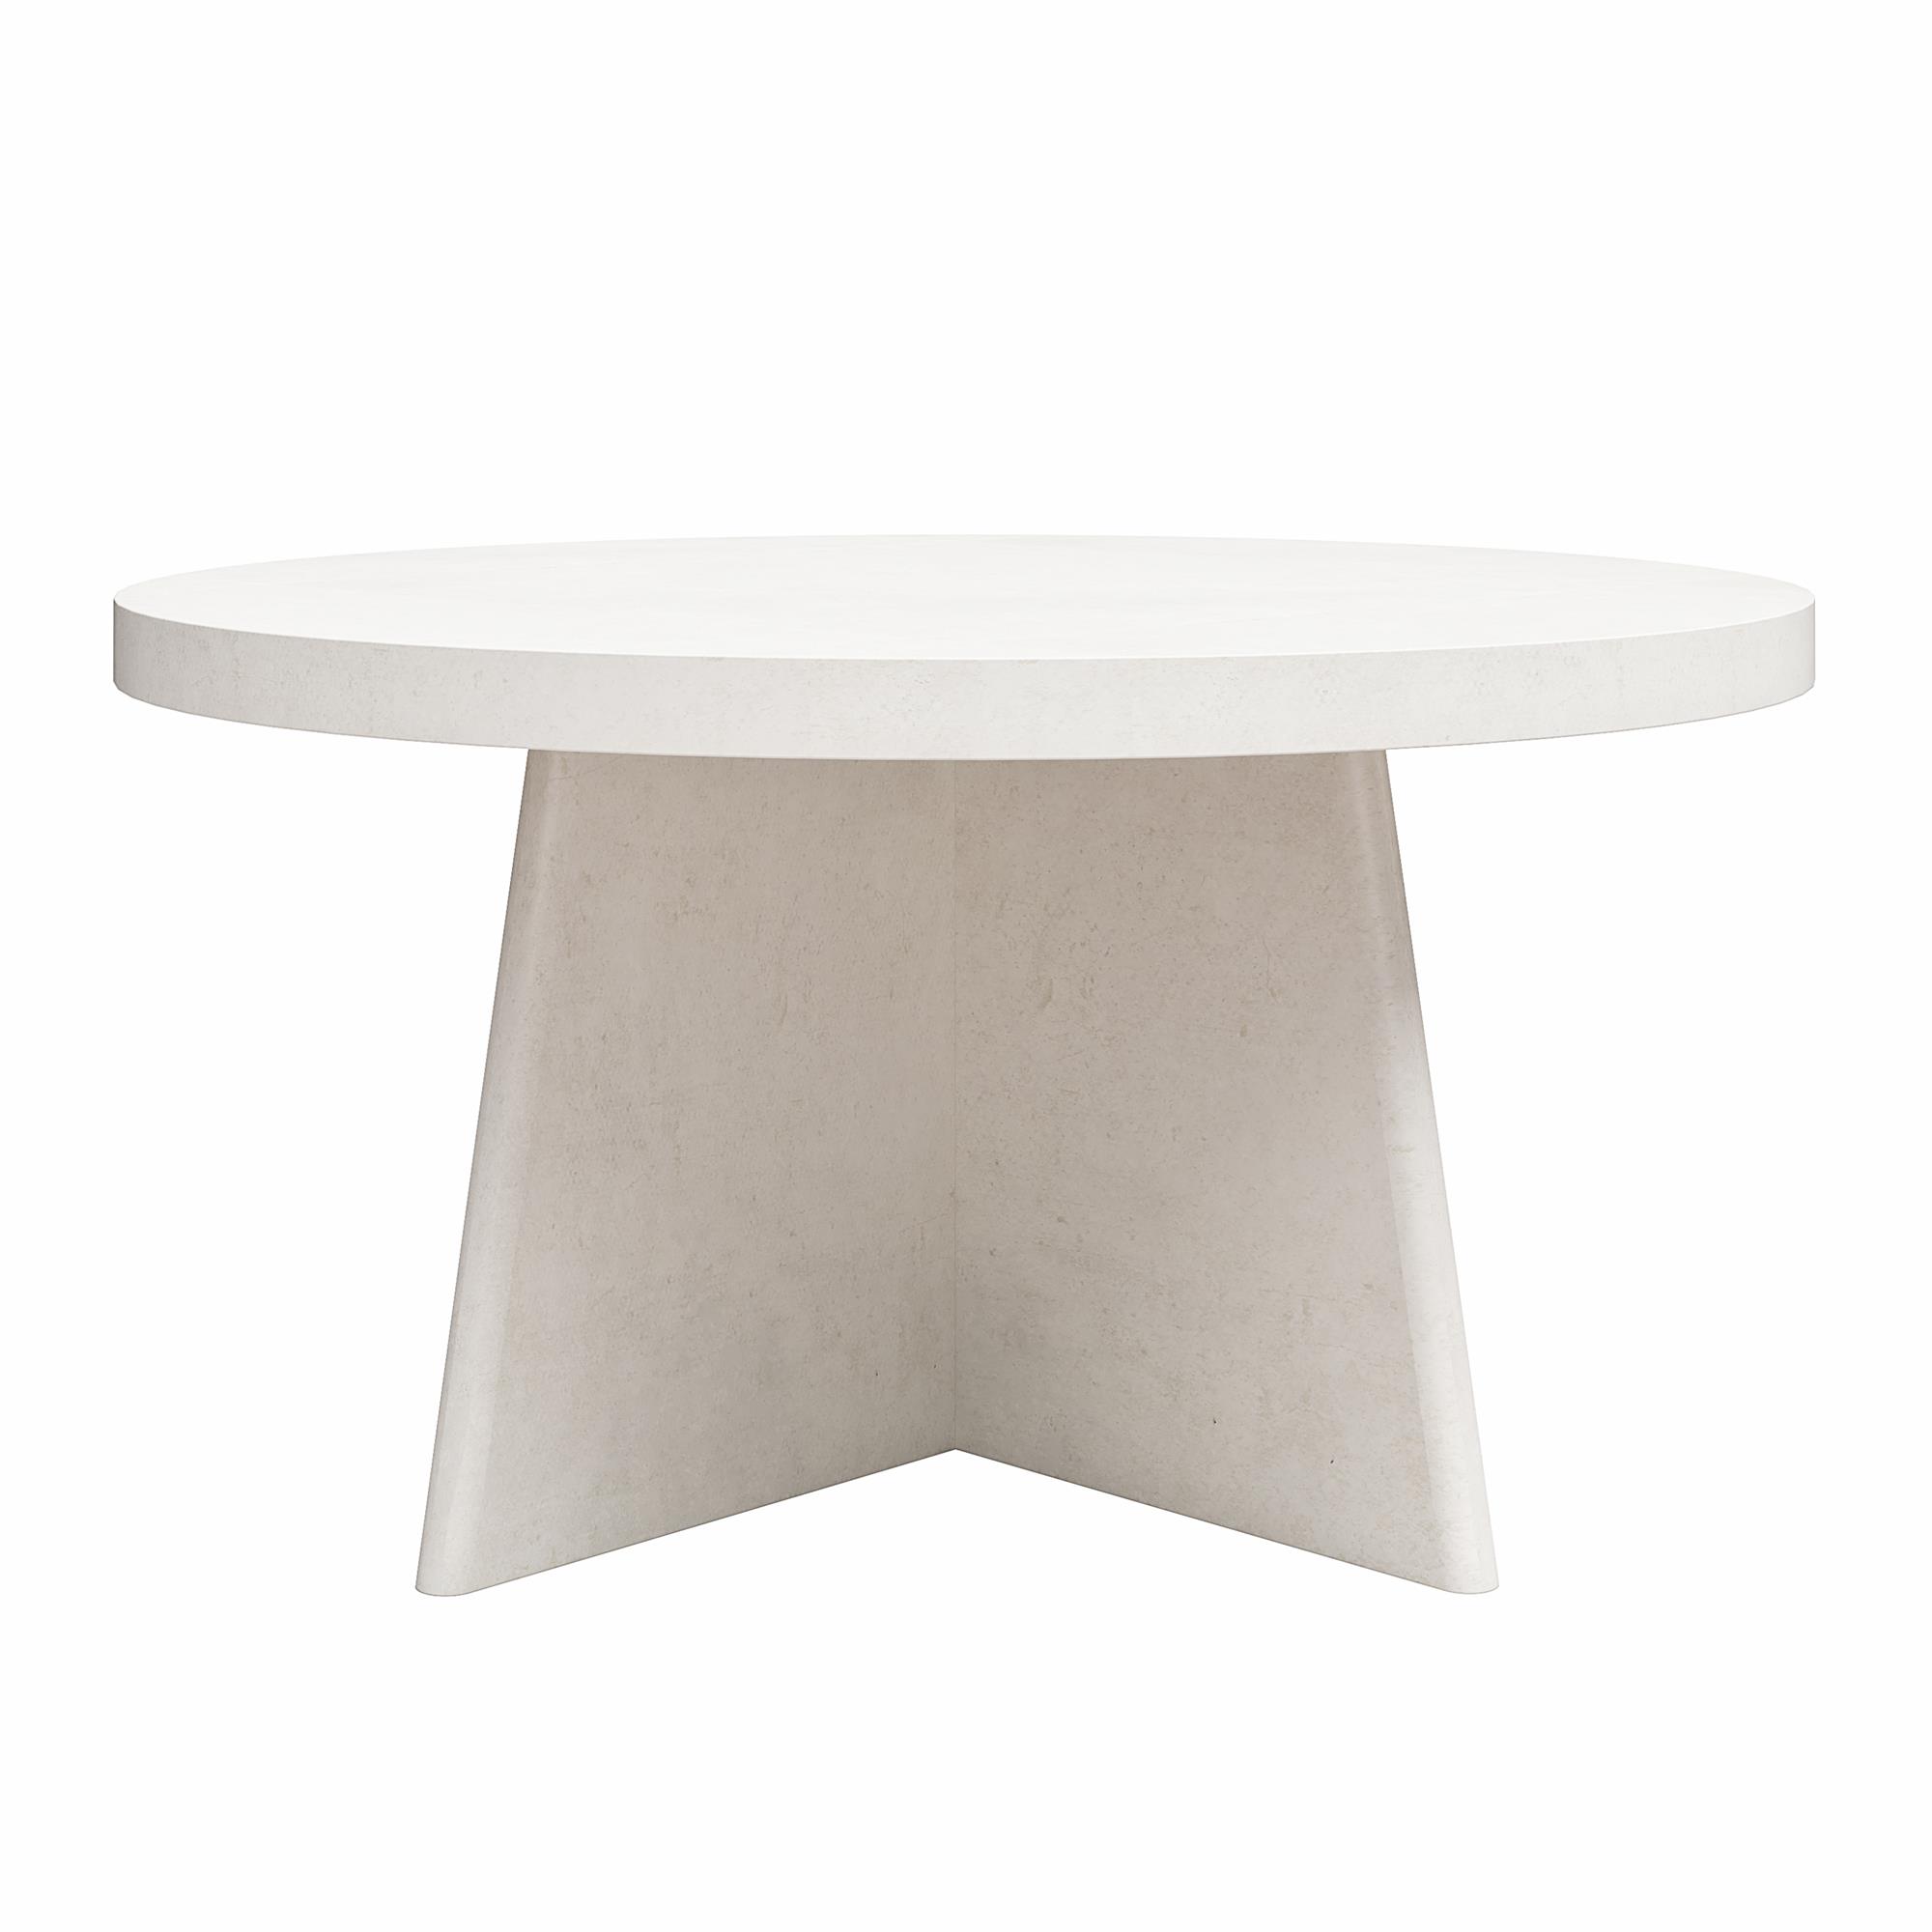 Ameriwood Home Liam Coffee Table, Faux Plaster - image 3 of 11